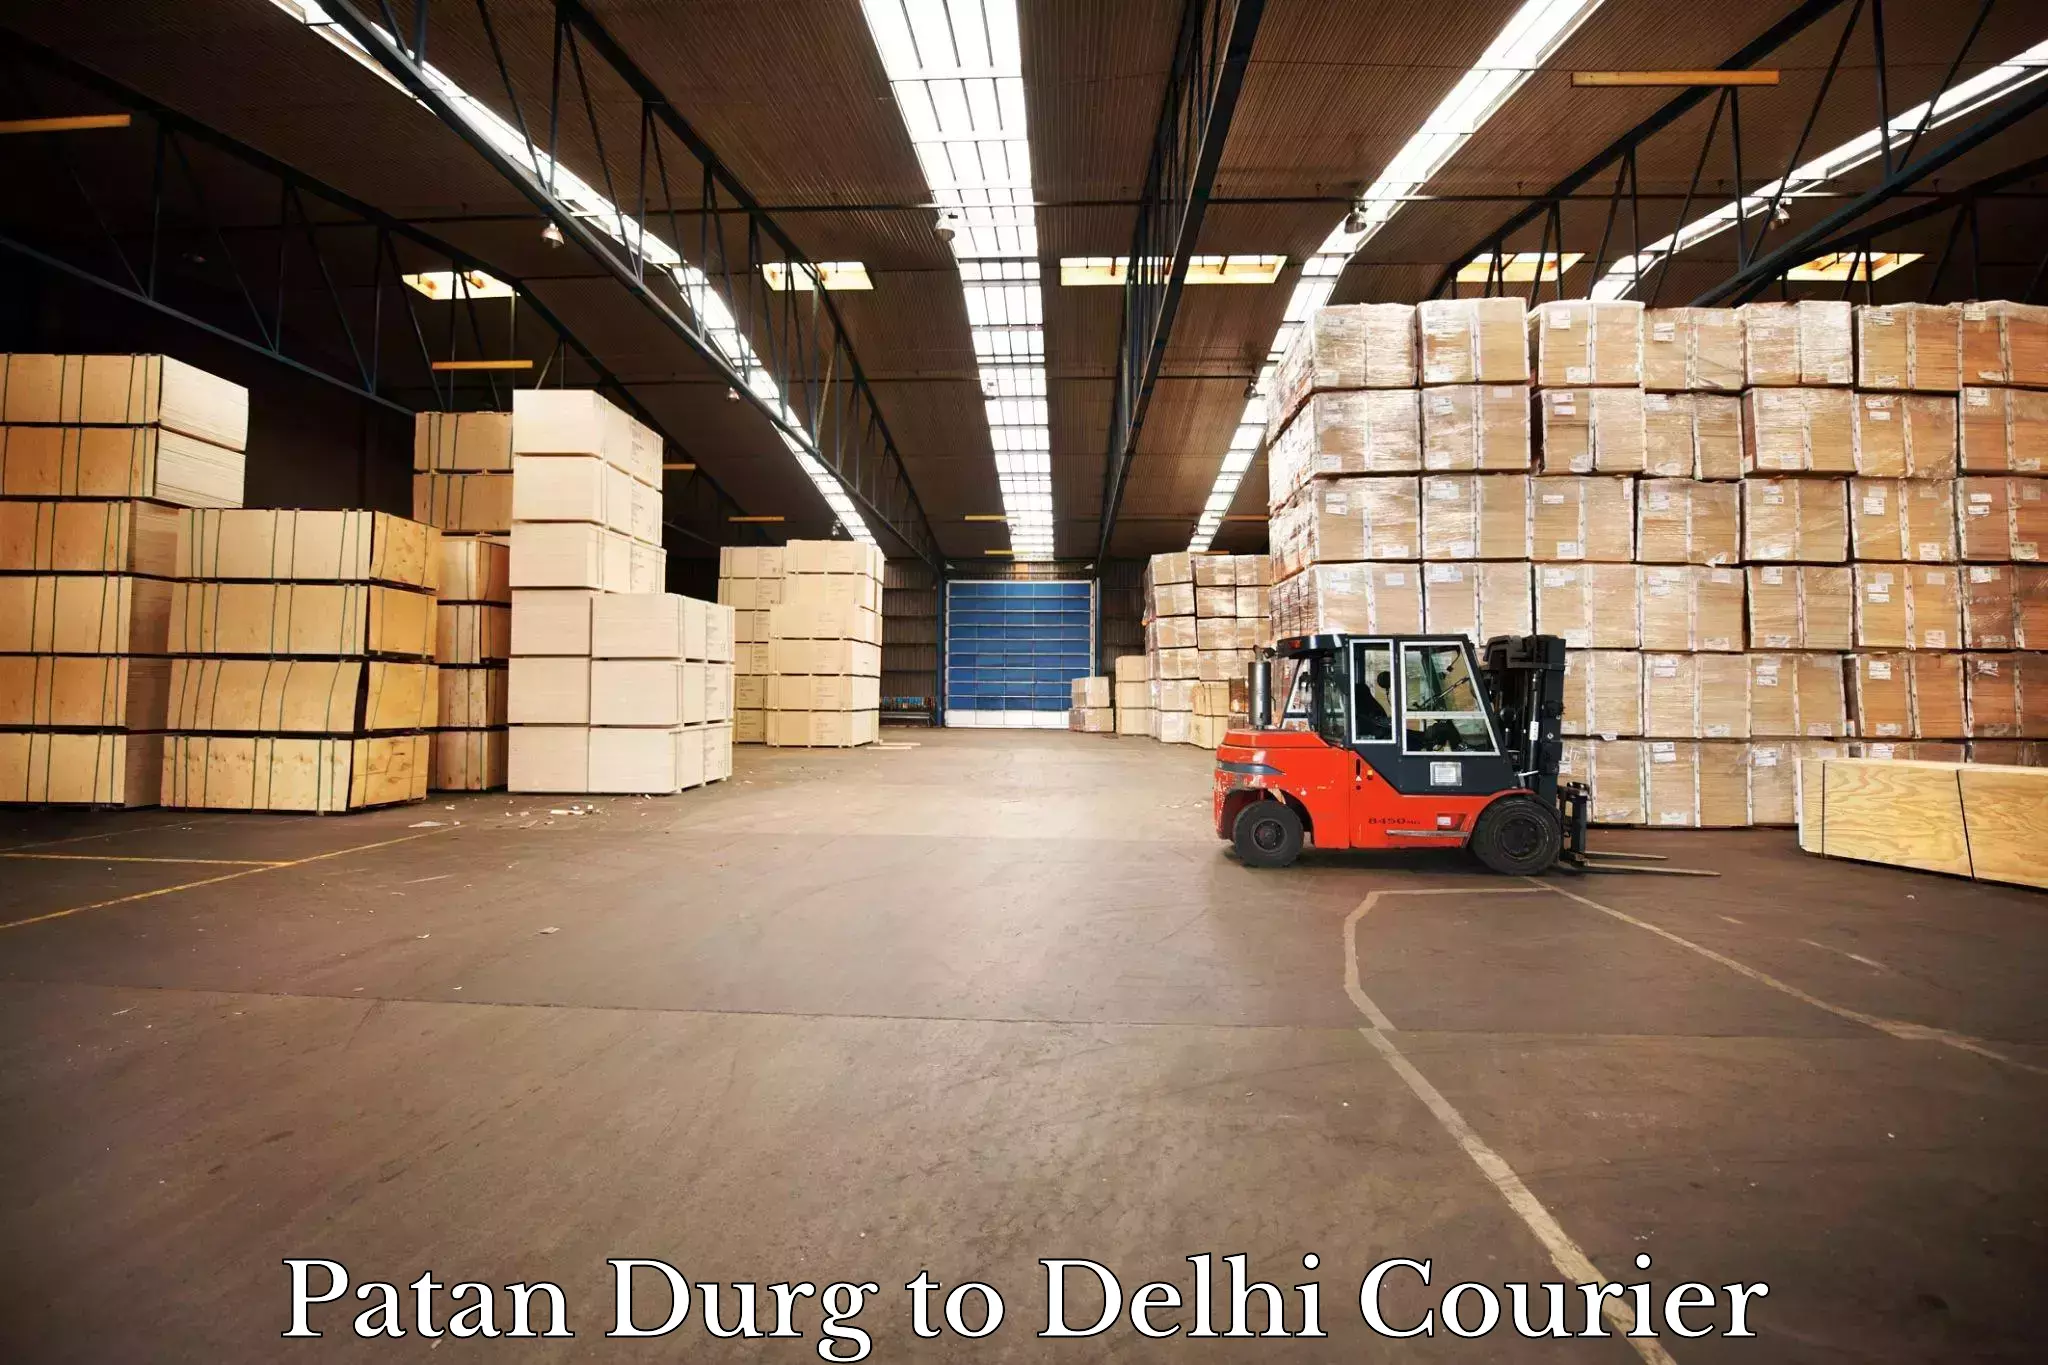 Seamless shipping service Patan Durg to Lodhi Road